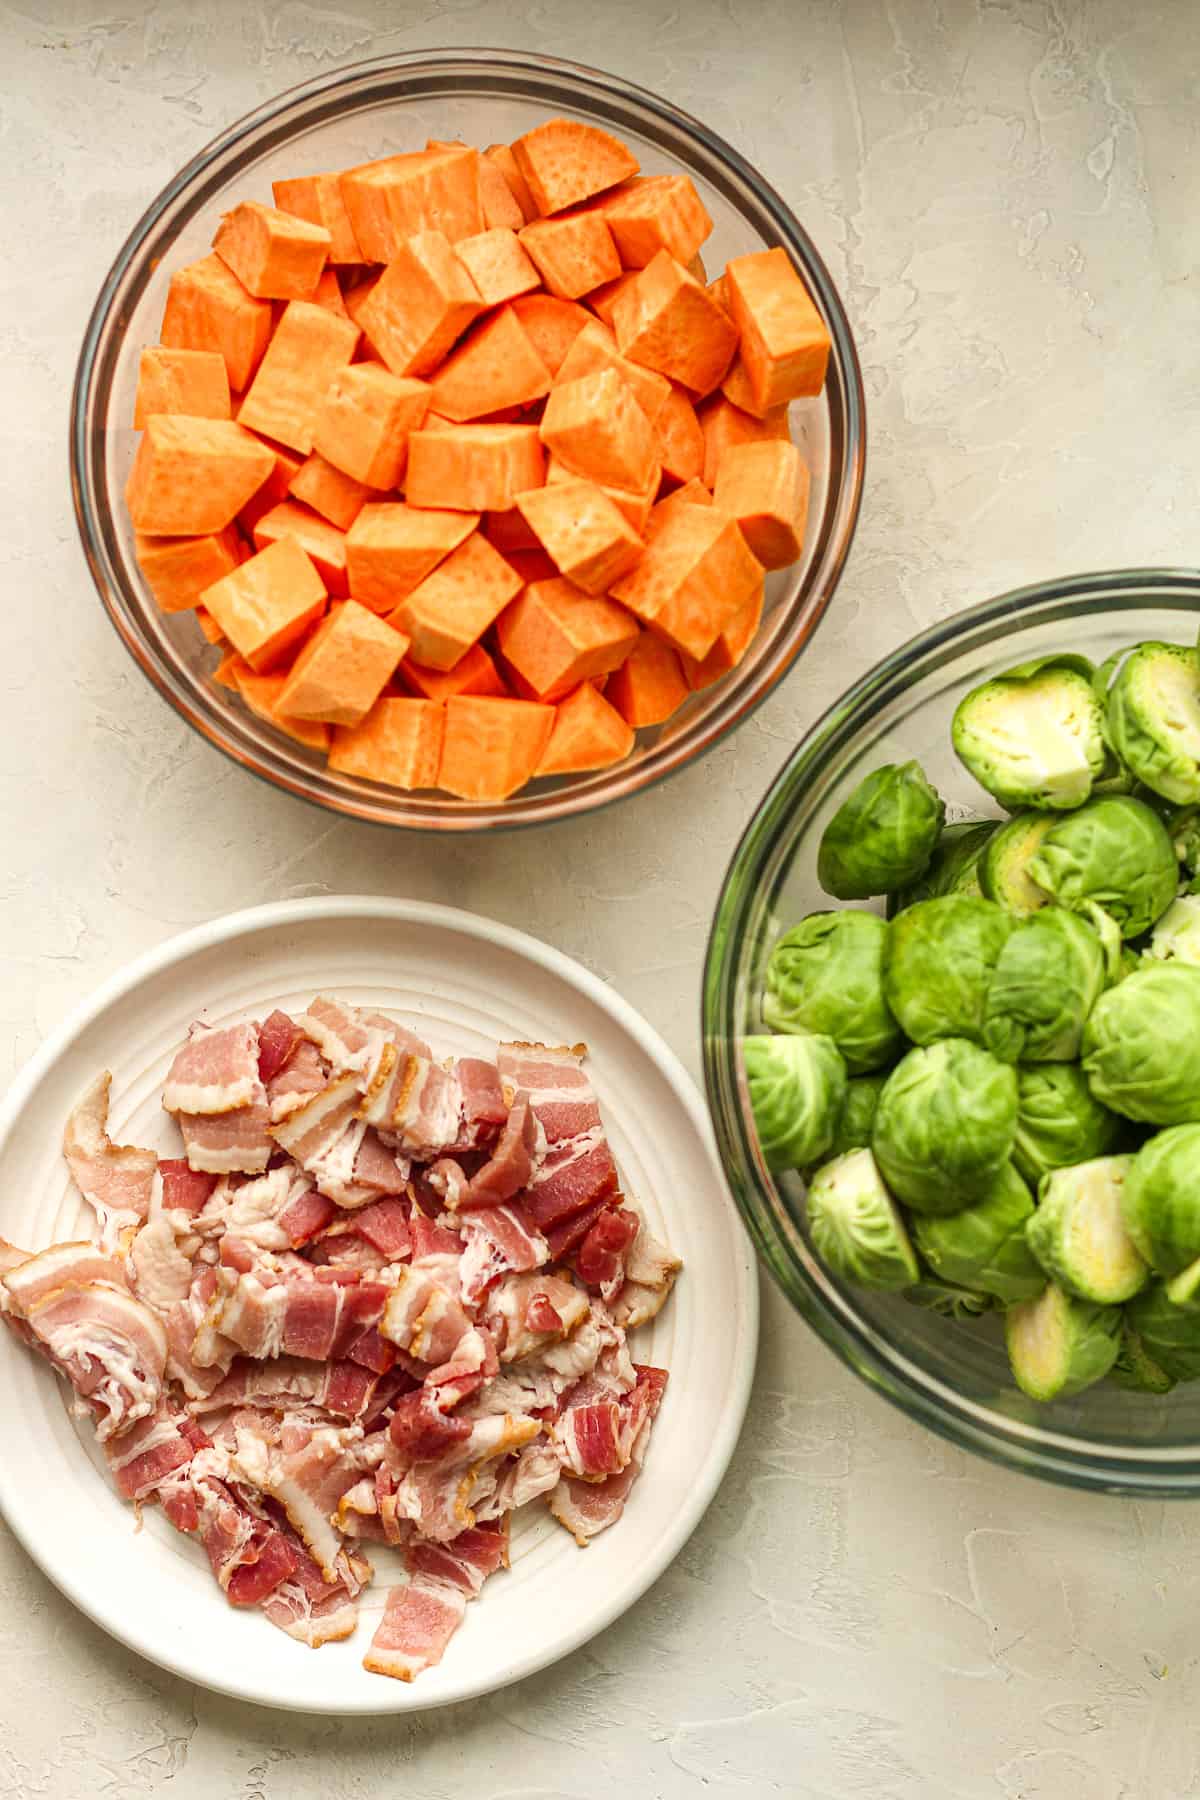 A bowl of chopped sweet potatoes, a bowl of halved Brussels sprouts, and a plate of chopped raw bacon.